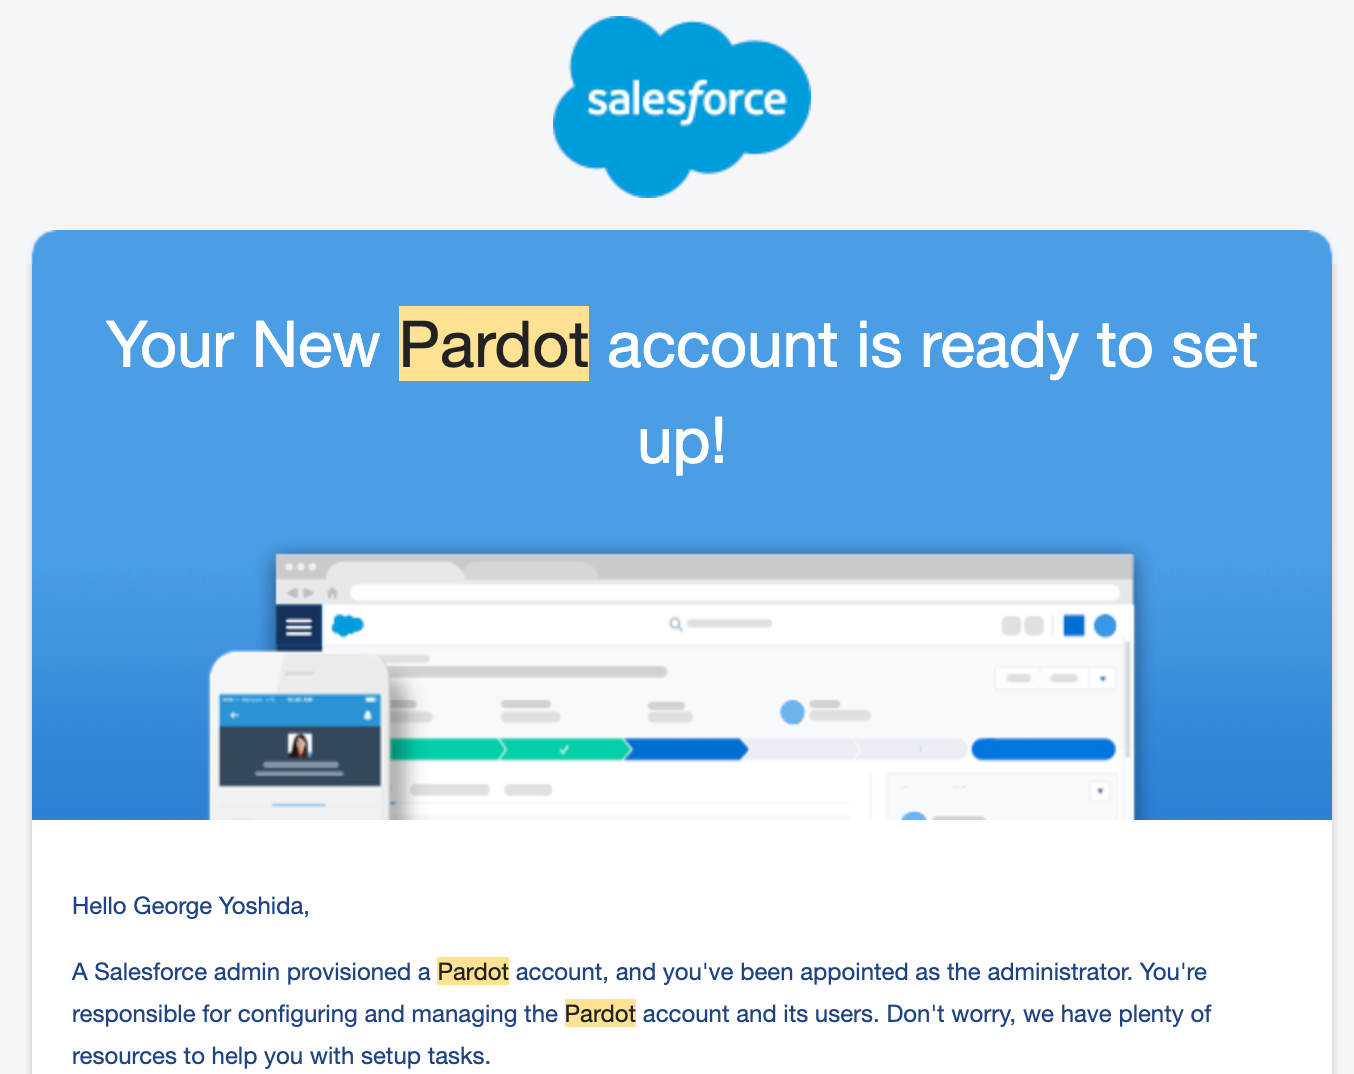 Your_new_Pardot_account_is_ready_to_set_up__-y_lne_st-_株式会社リバネス_メール.png